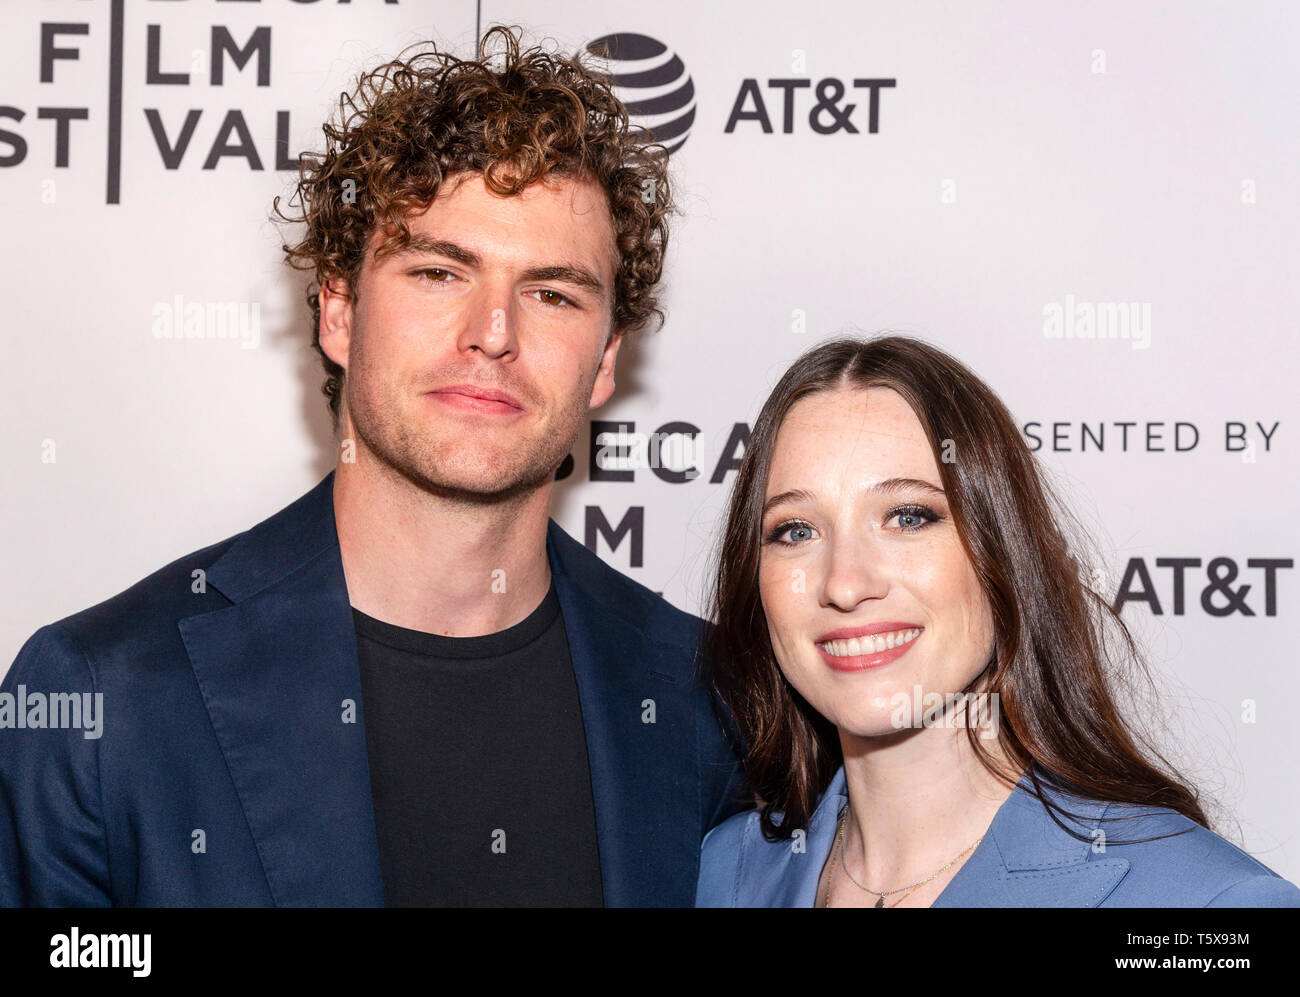 New York, NY - April 26, 2019: Vance Joy and Sophie Lowe attend the 'Blow The Man Down' screening during the 2019 Tribeca Film Festival at SVA Theater Stock Photo